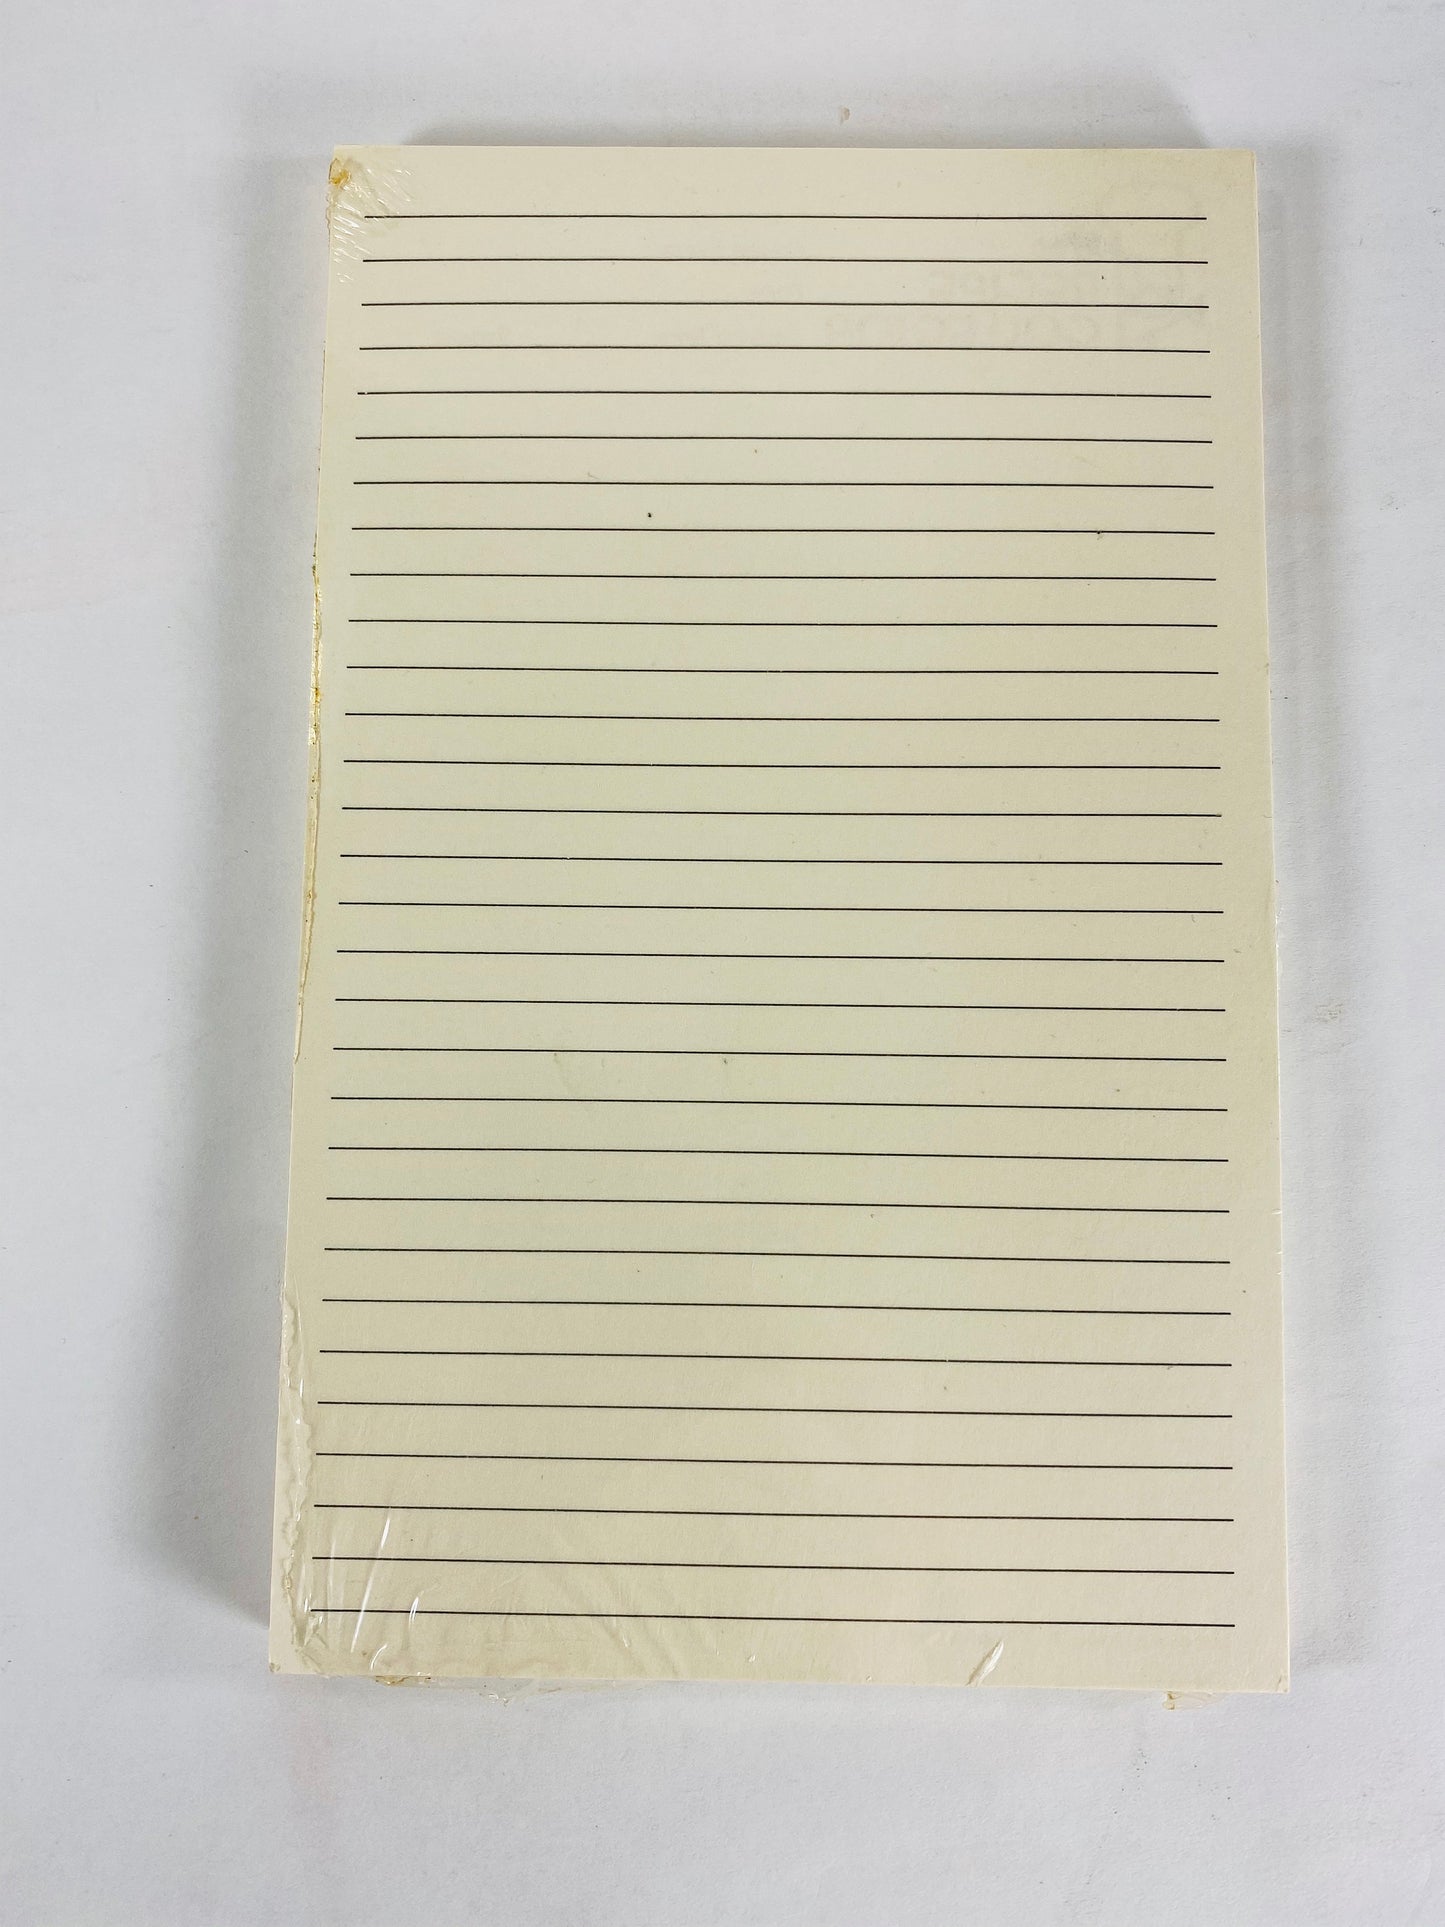 Vintage Recipe Collector notepad Recipe cards, lined front and back. Retro kitchen cookbook notepad still sealed in original package! 8x5